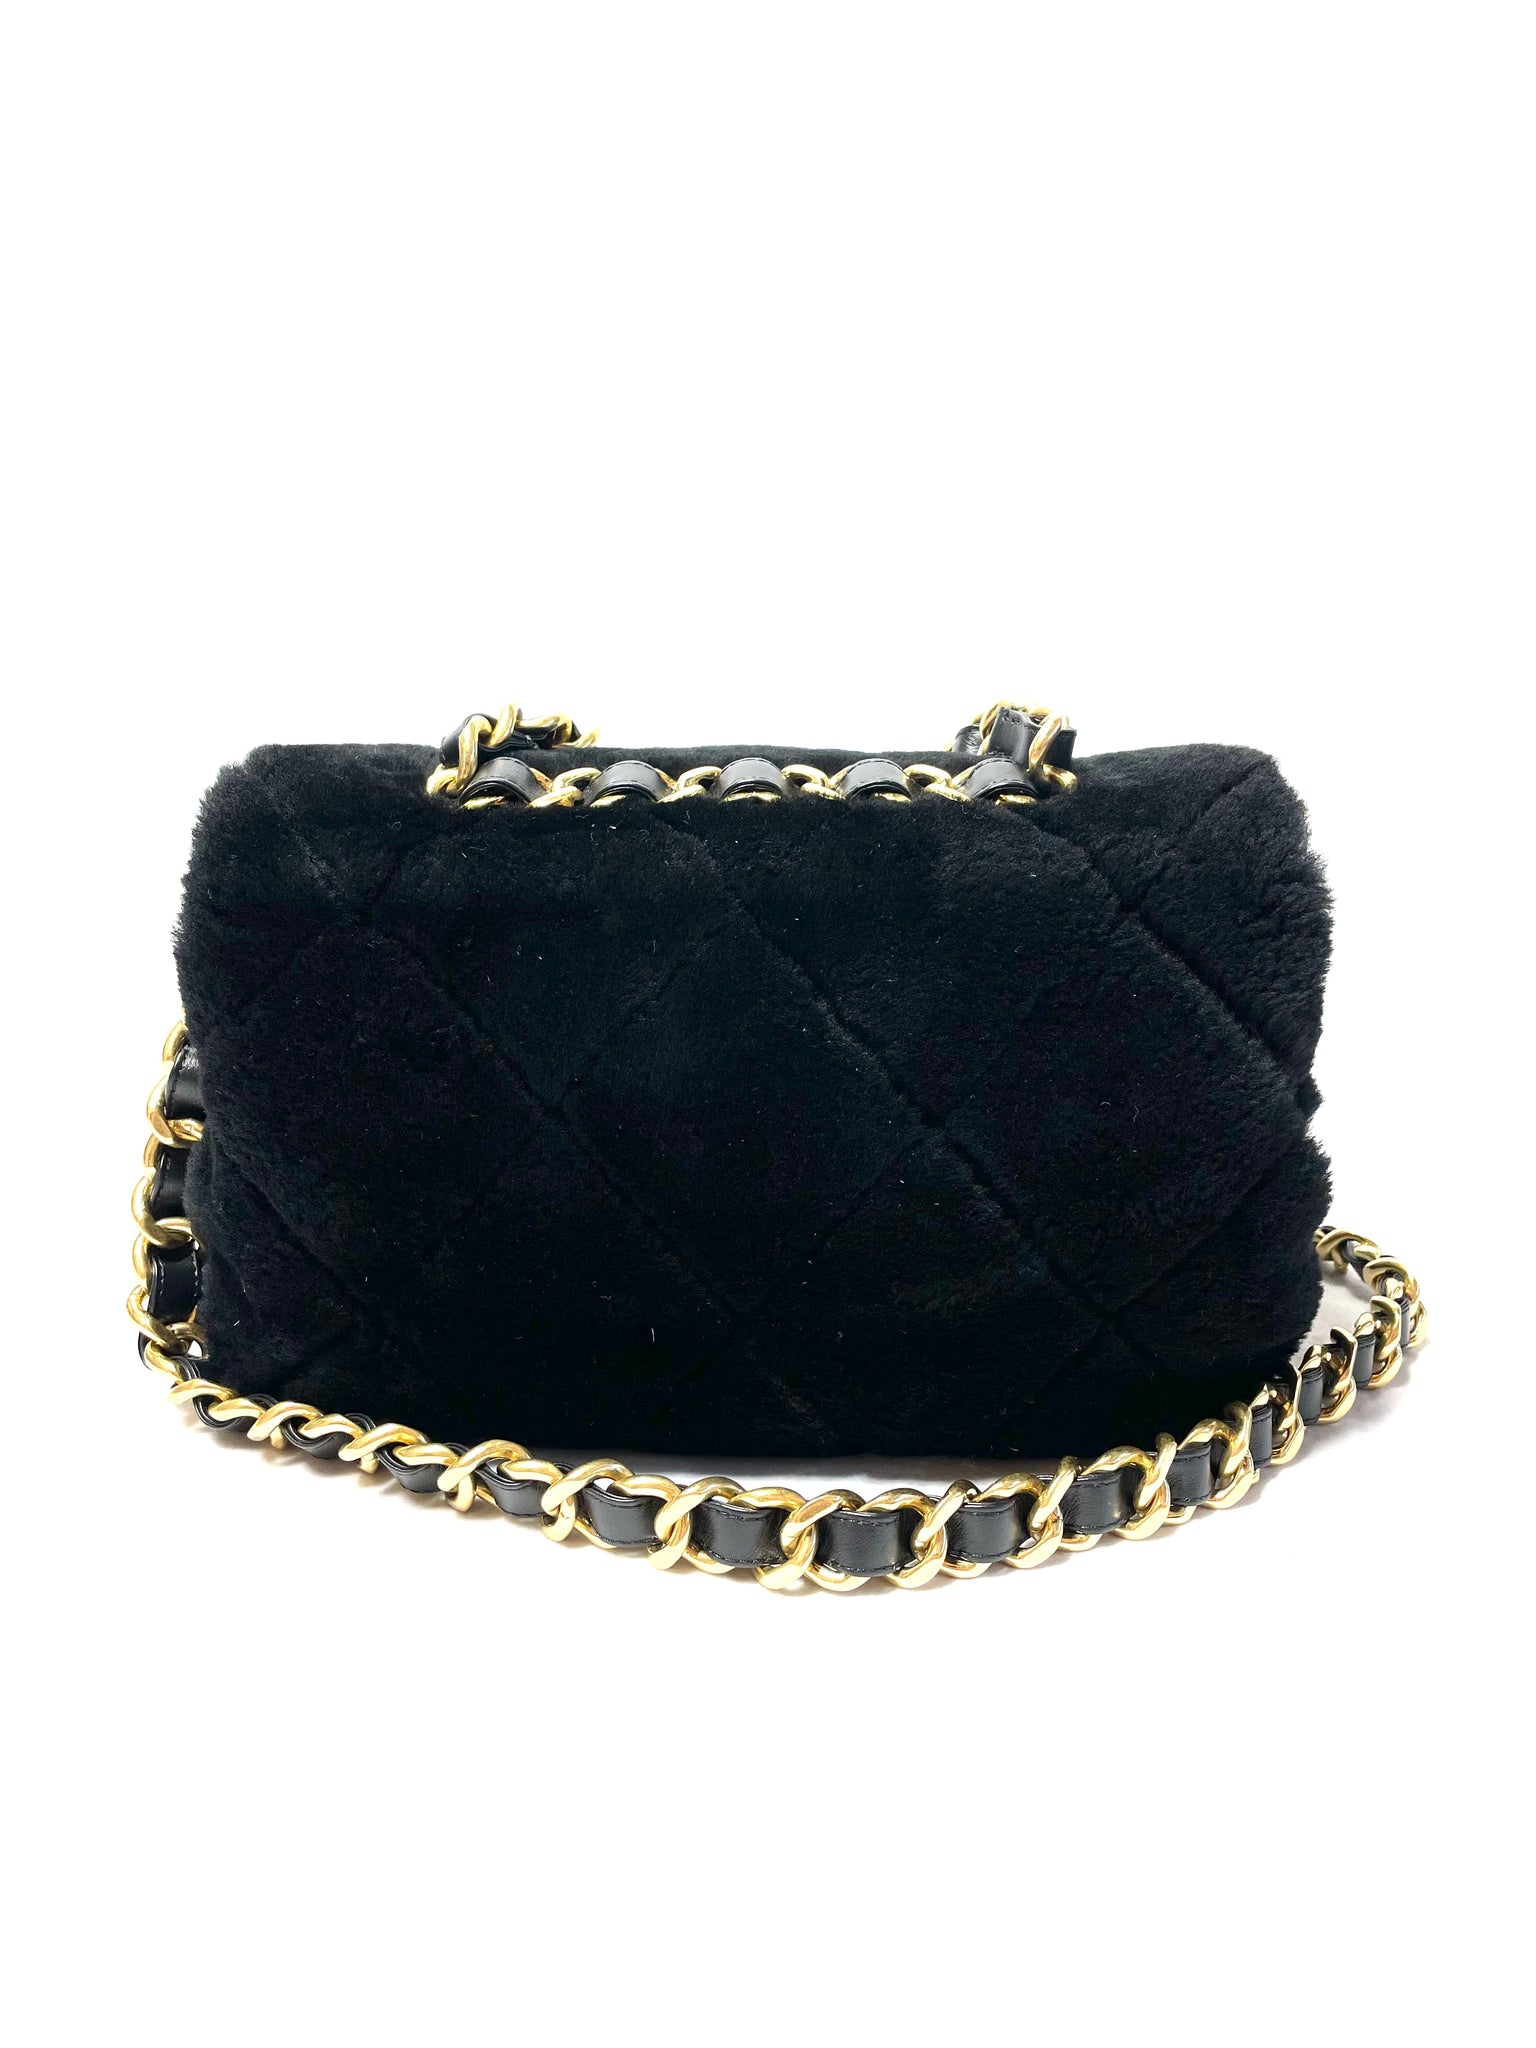 Chanel Chain Handle Flap Bag Quilted Shearling